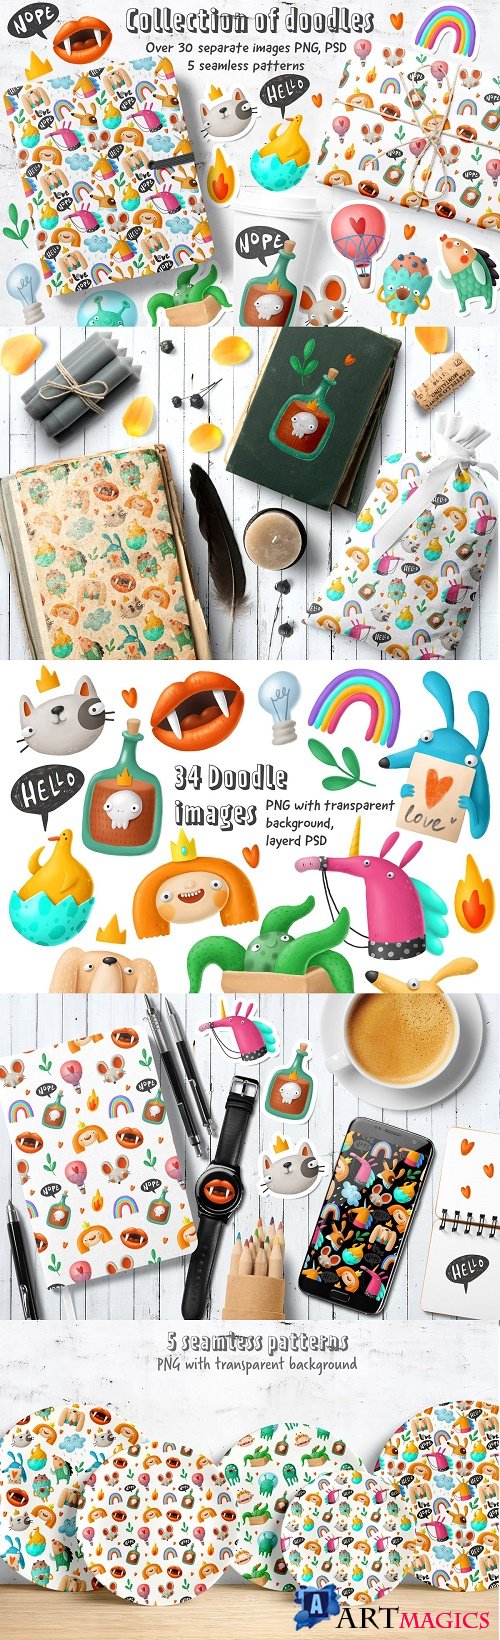 Collection of doodles - 2976709 - Cartoon Doodles Clipart